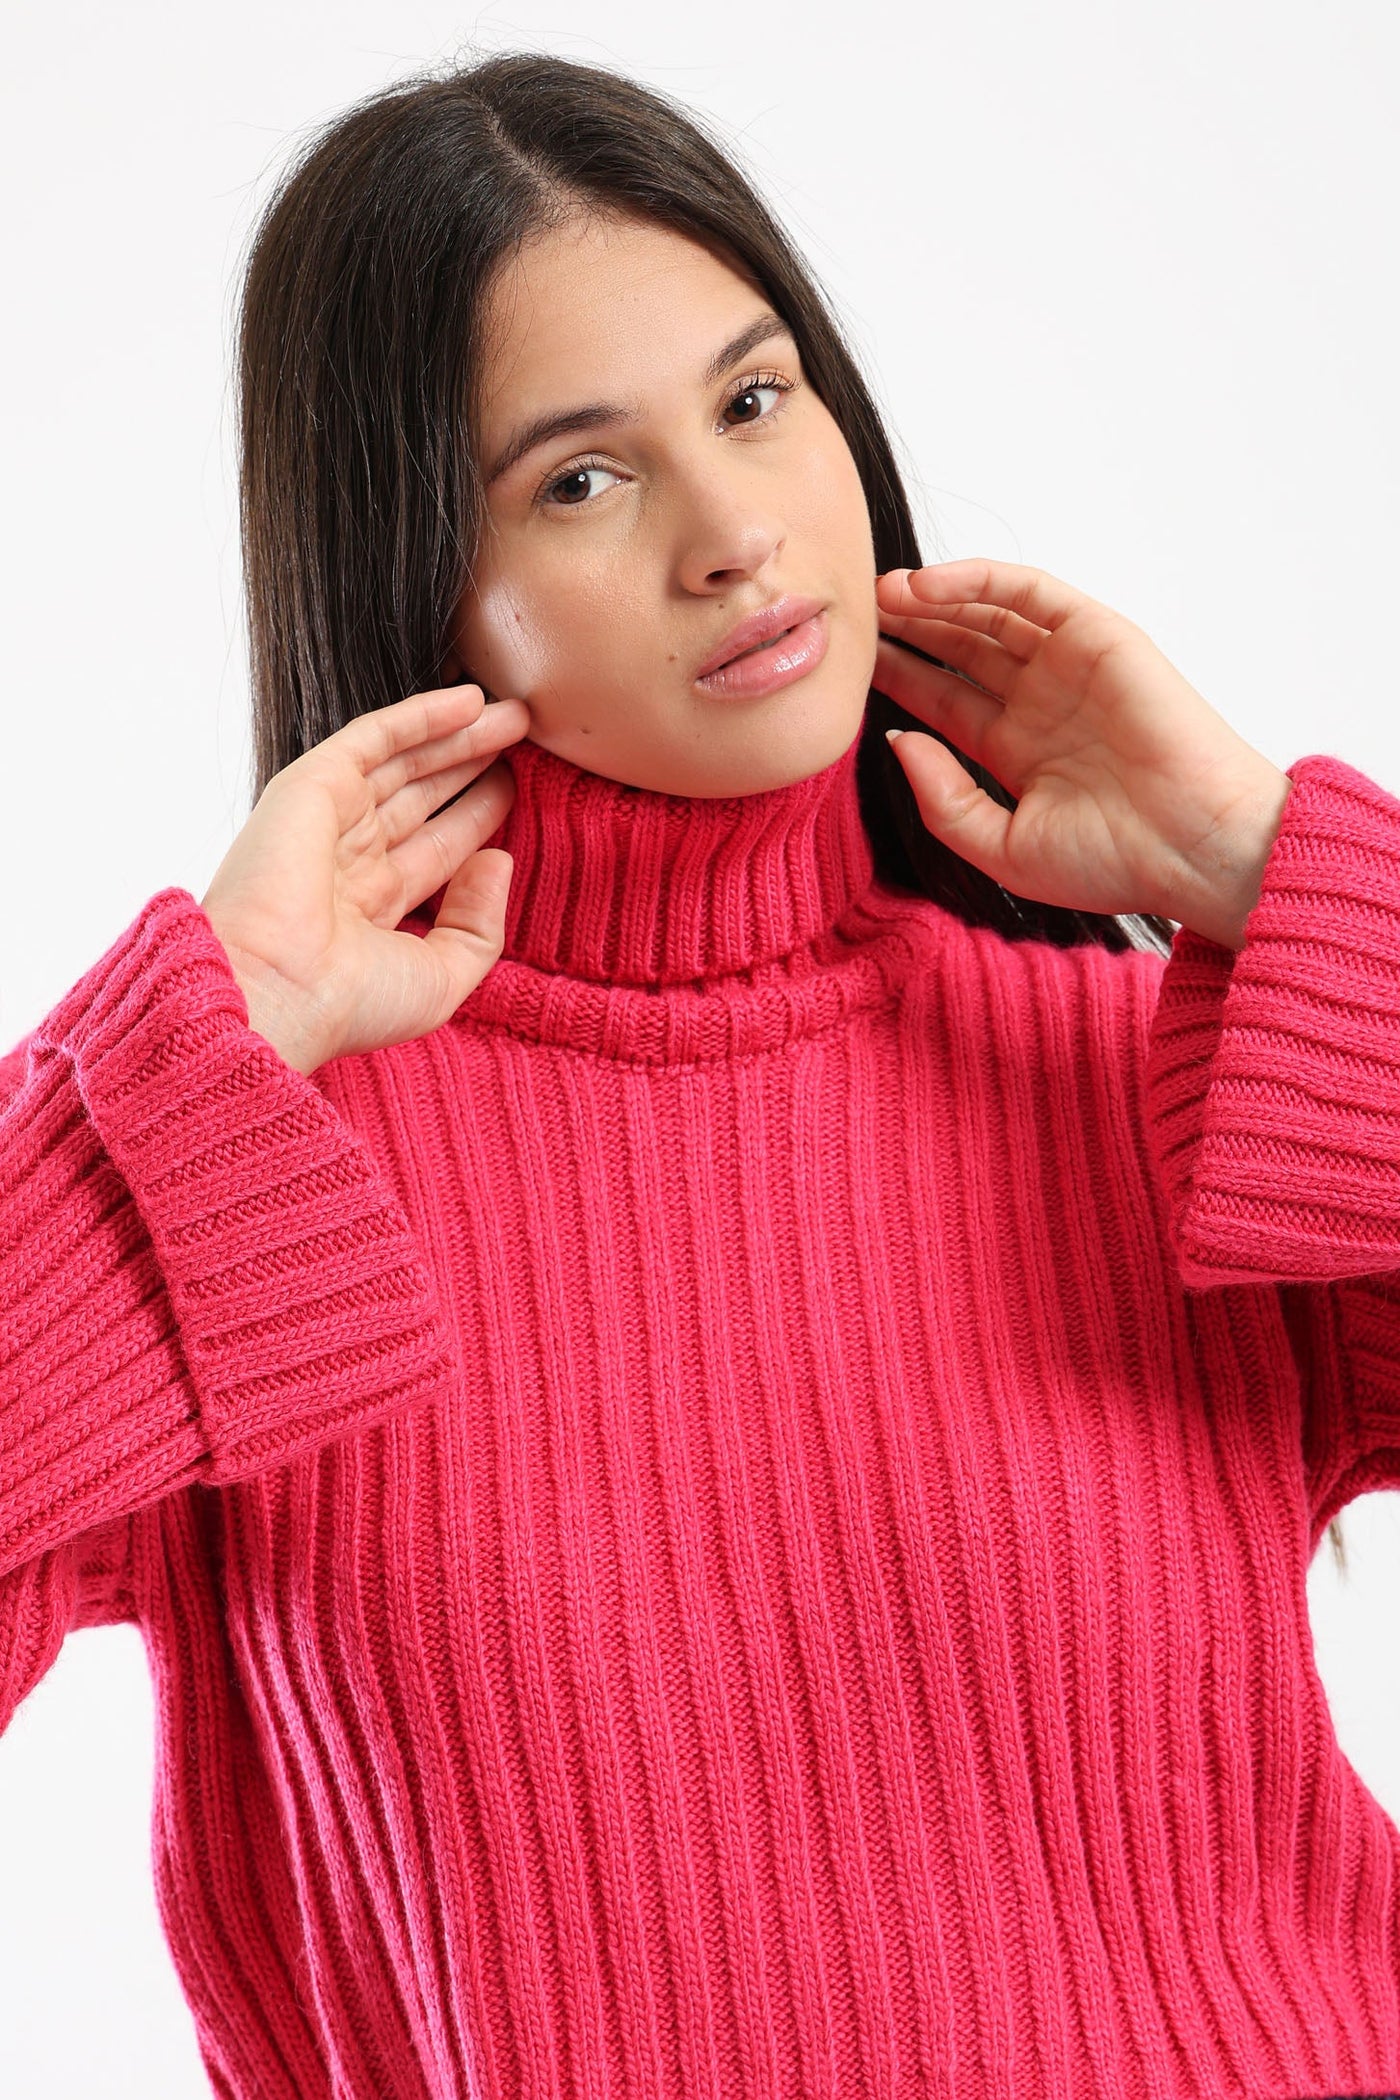 CHUNKY HIGH NECK SWEATER - PINK